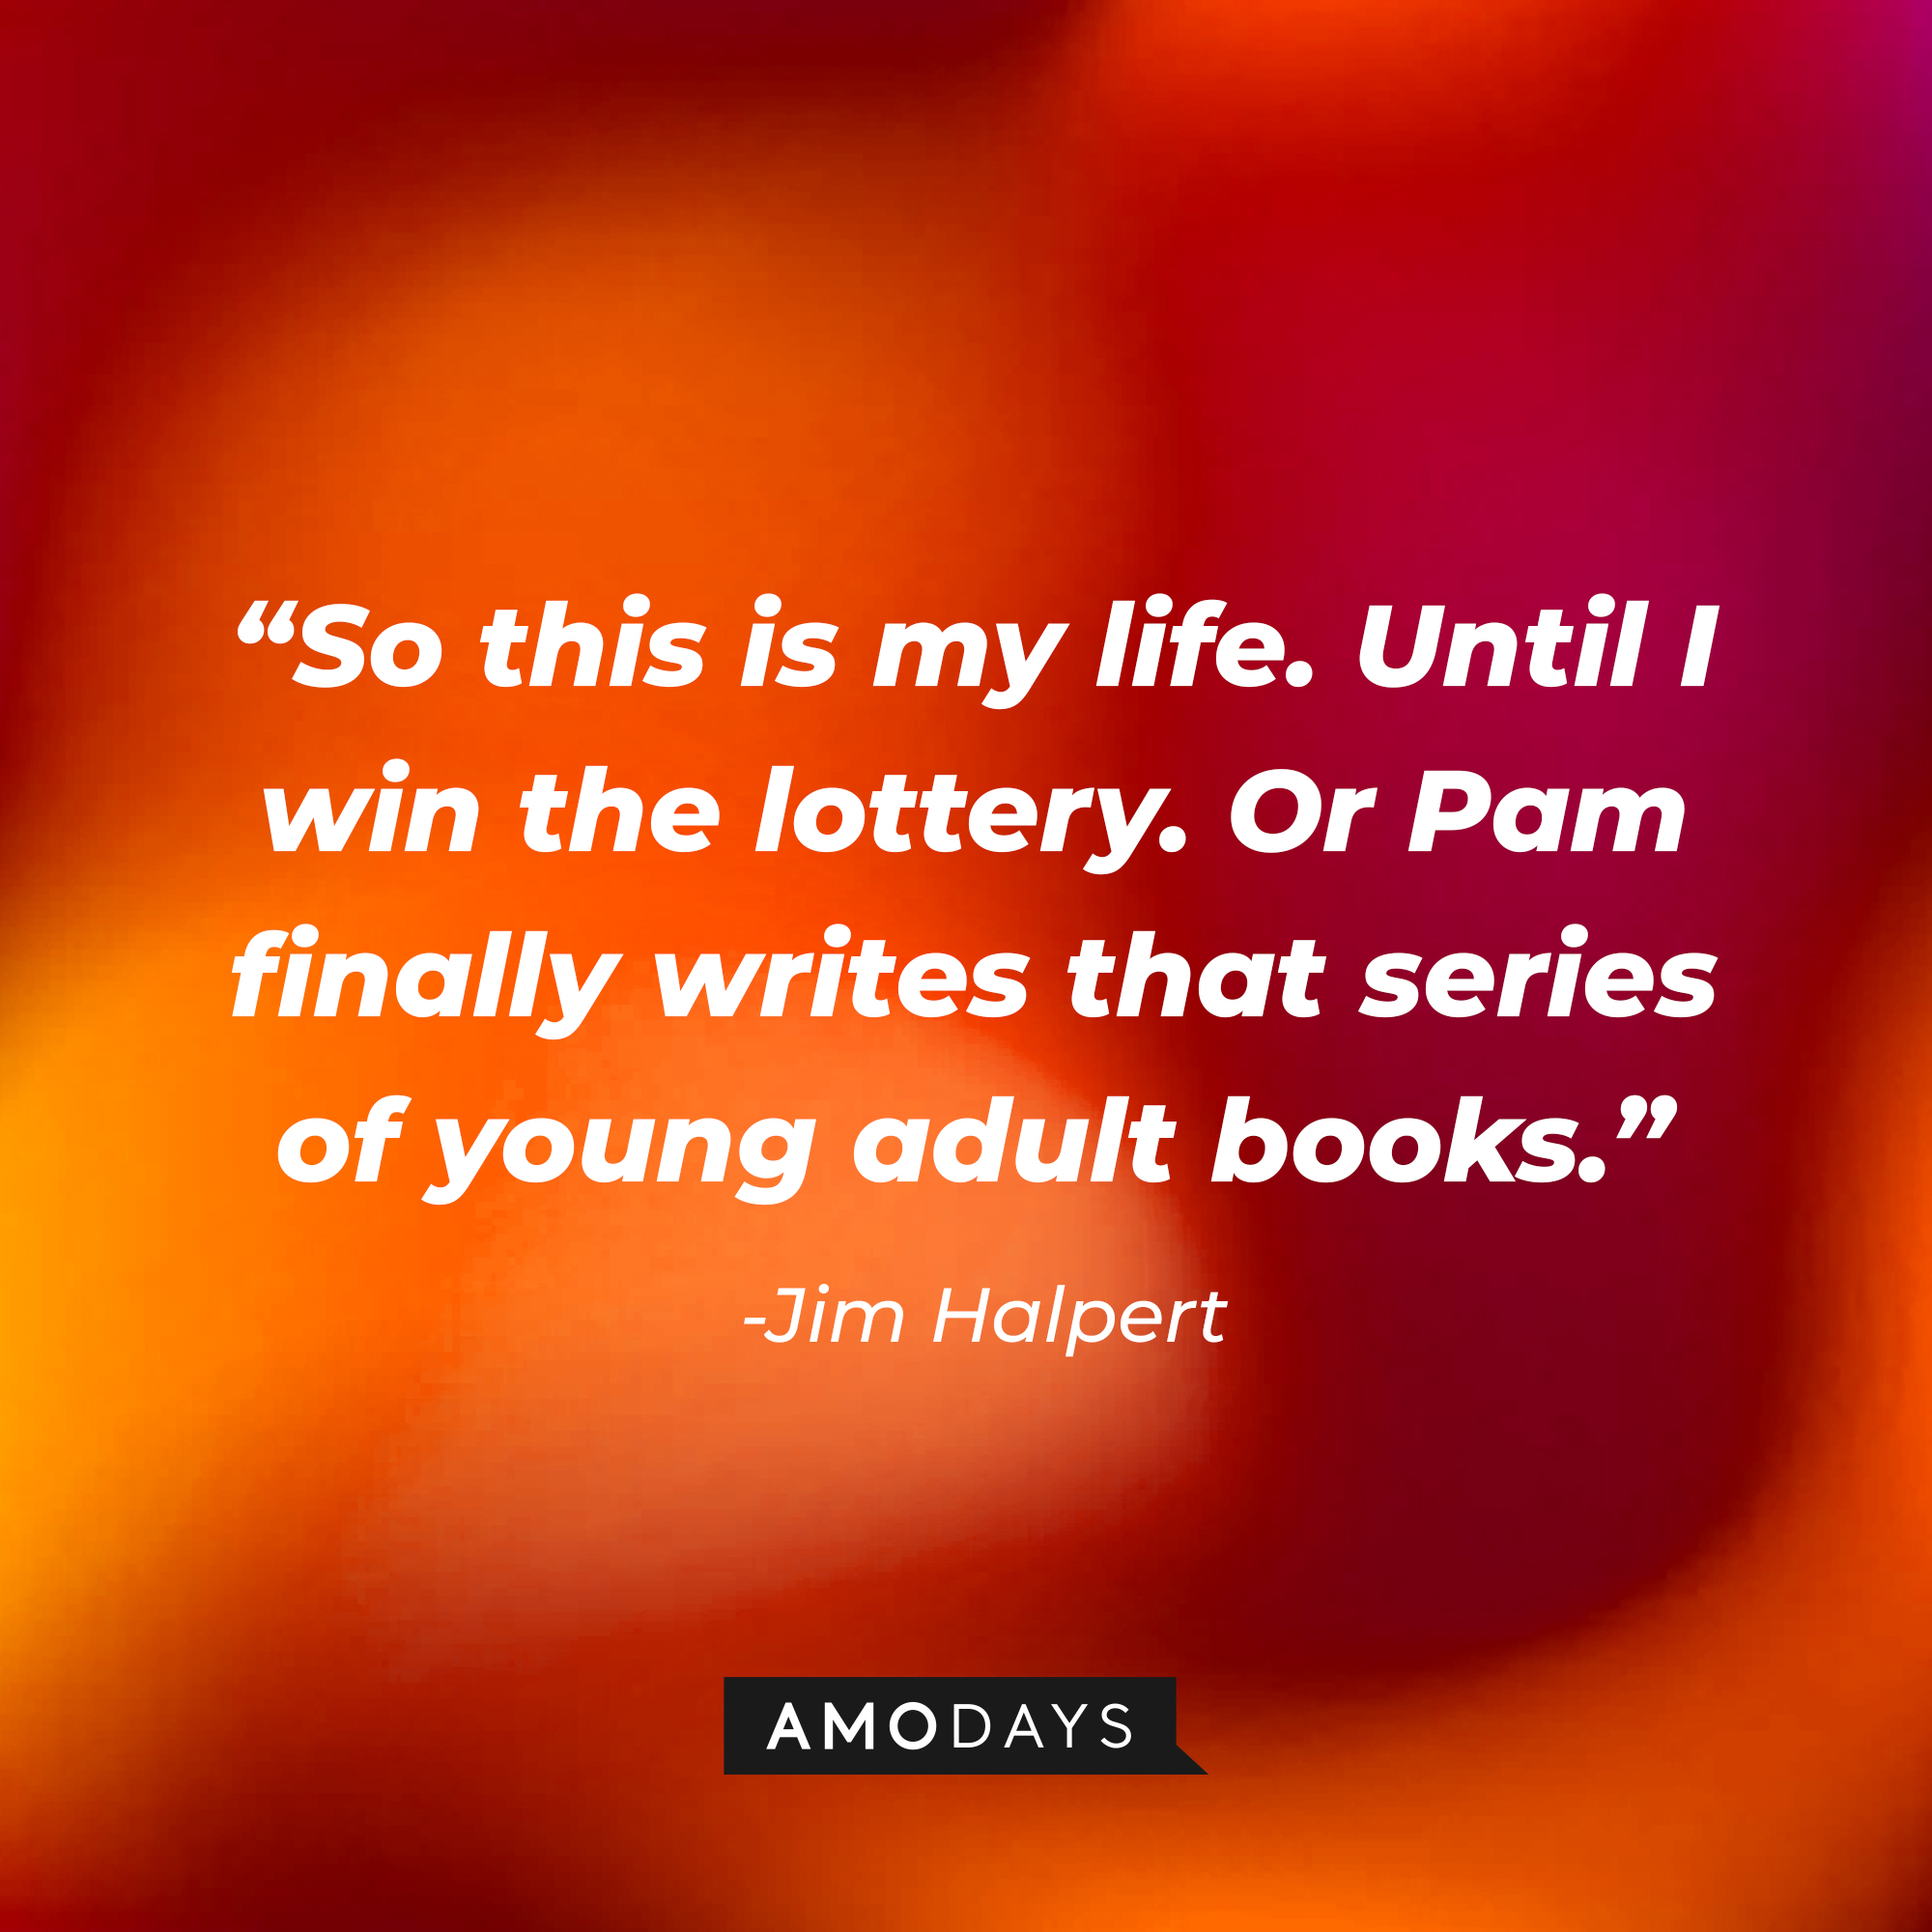 Jim Halpert’s quote: "So this is my life. Until I win the lottery. Or Pam finally writes that series of young adult books." | Source: AmoDays